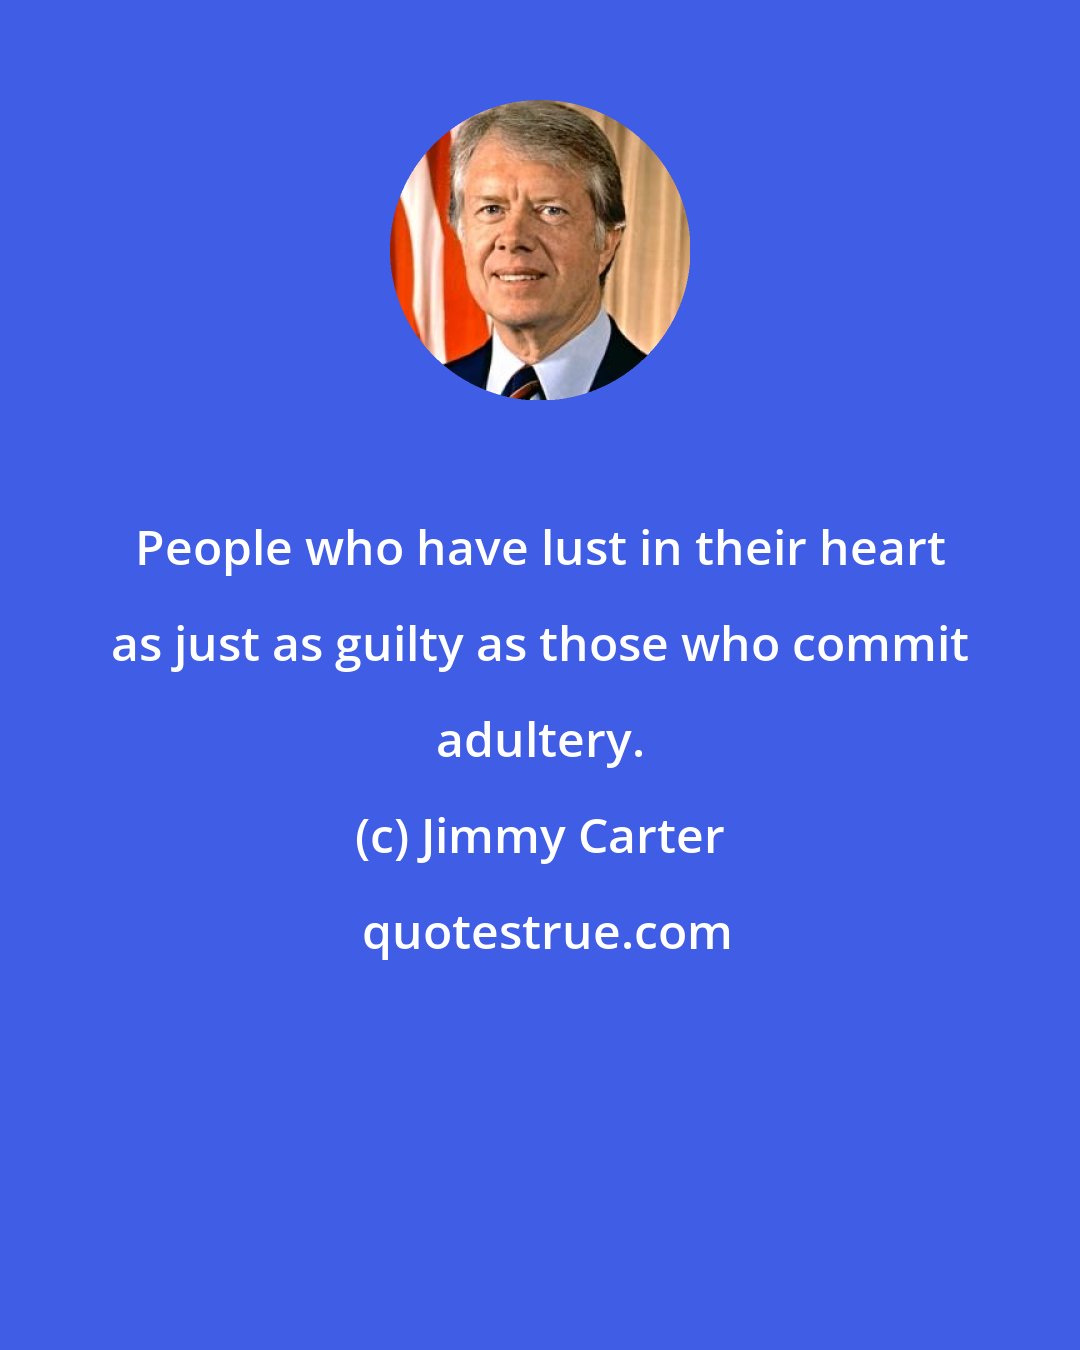 Jimmy Carter: People who have lust in their heart as just as guilty as those who commit adultery.